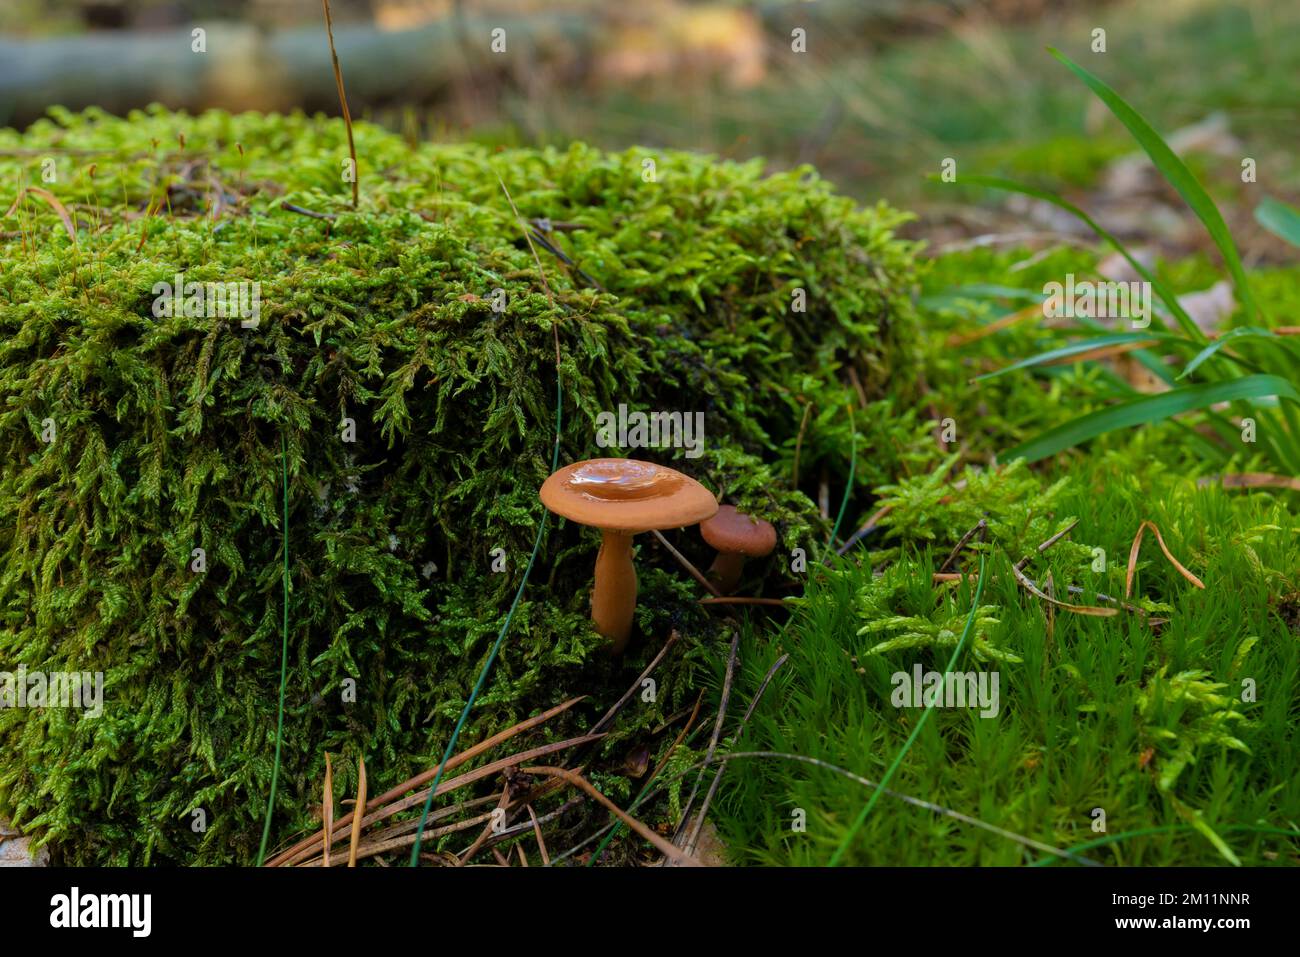 Poisonous mushroom, small brown poisonous mushrooms in the forest in autumn Stock Photo